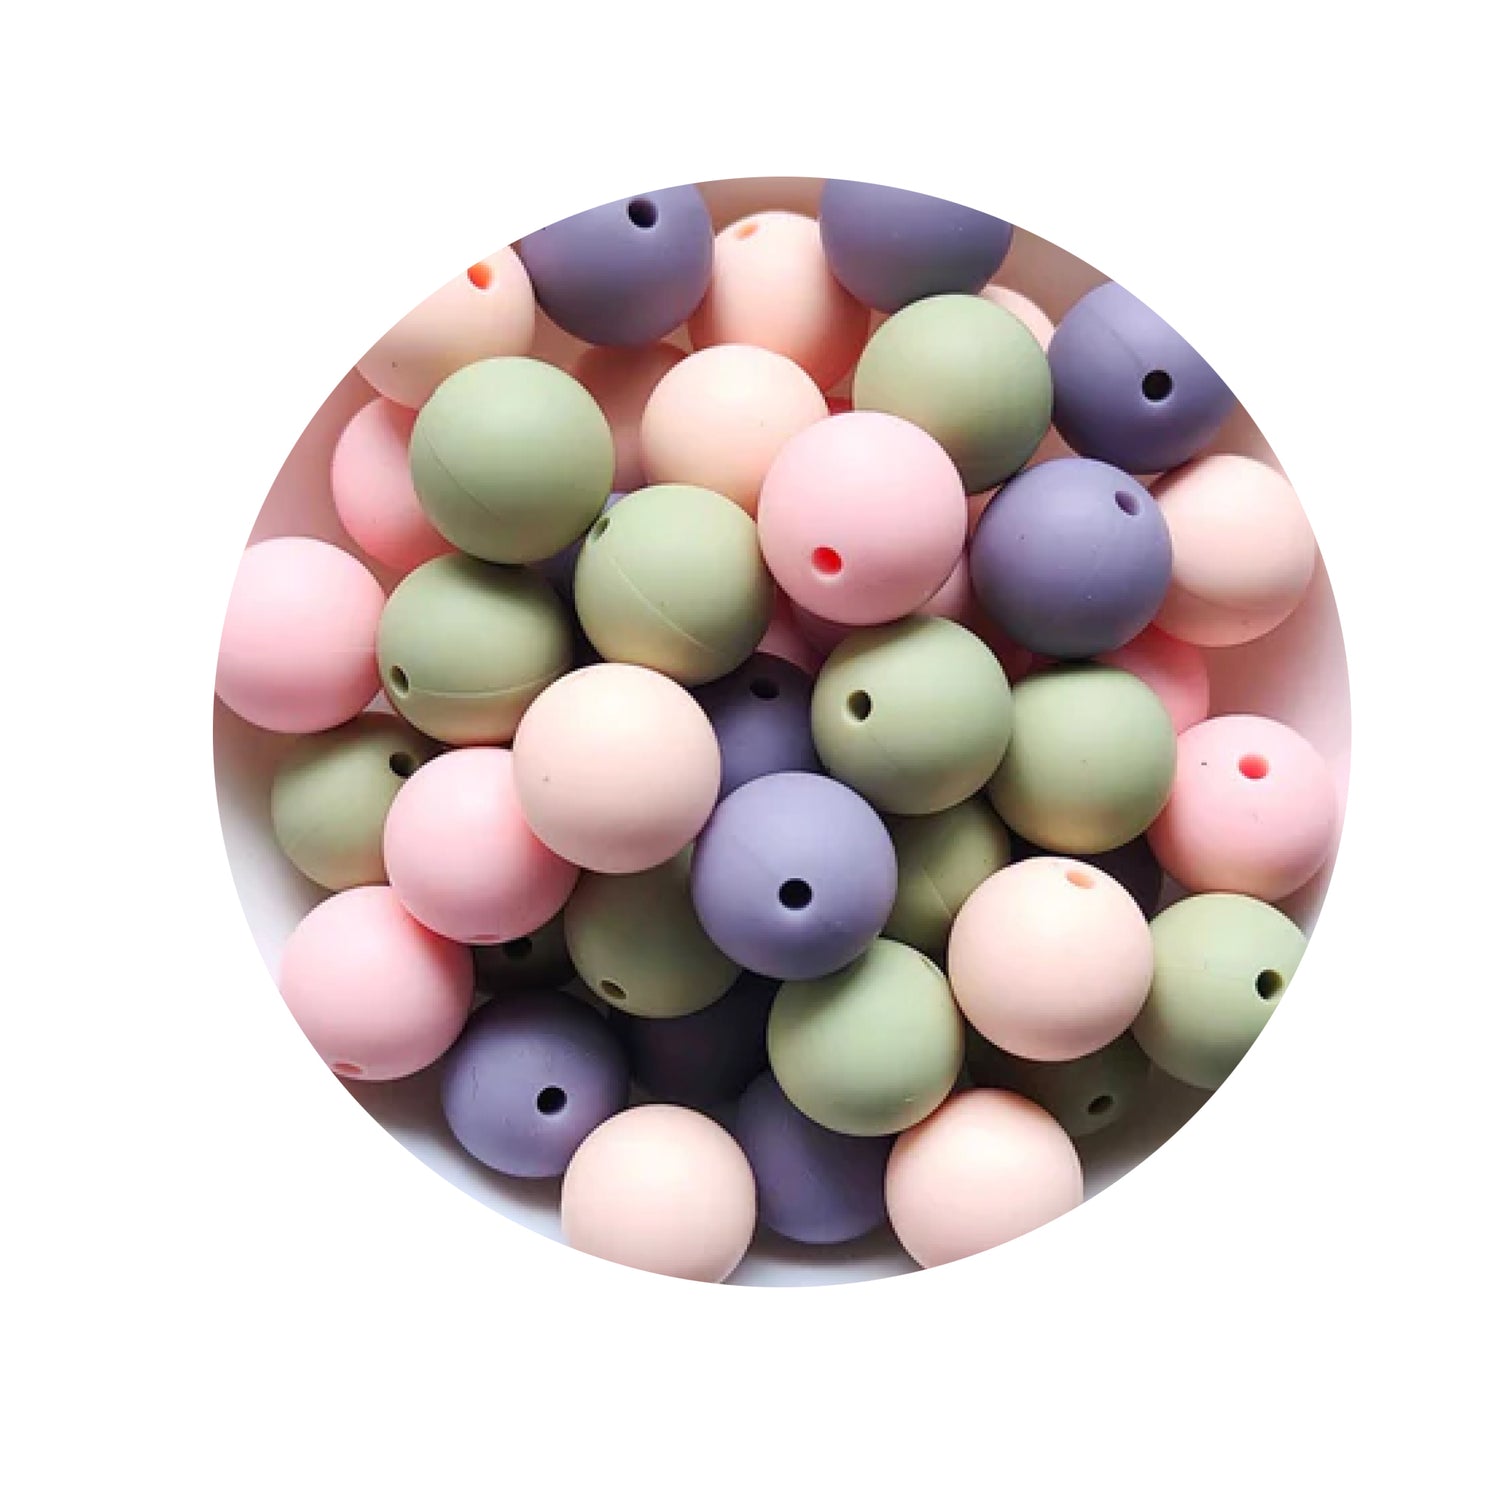 Manufacturer In China Silicone Beads Wholesale Jewelry Making Supplies Bead  - Buy Manufacturer In China Silicone Beads Wholesale Jewelry Making  Supplies Bead Product on